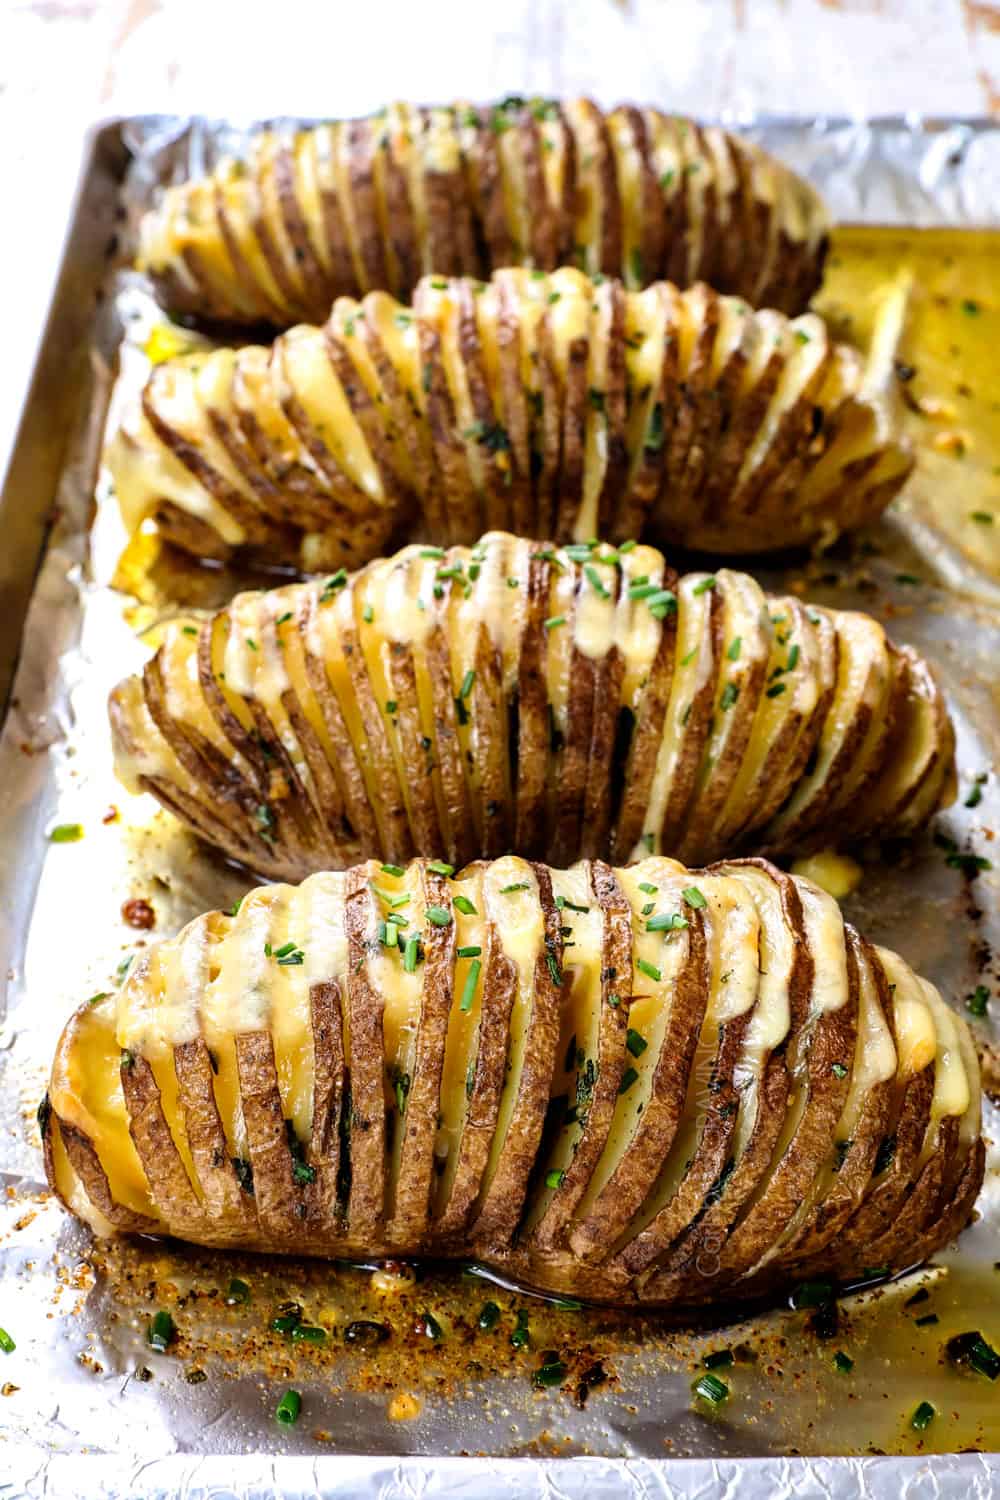 showing how to make Hasselback potato recipe by baking potatoes until the cheese is melted